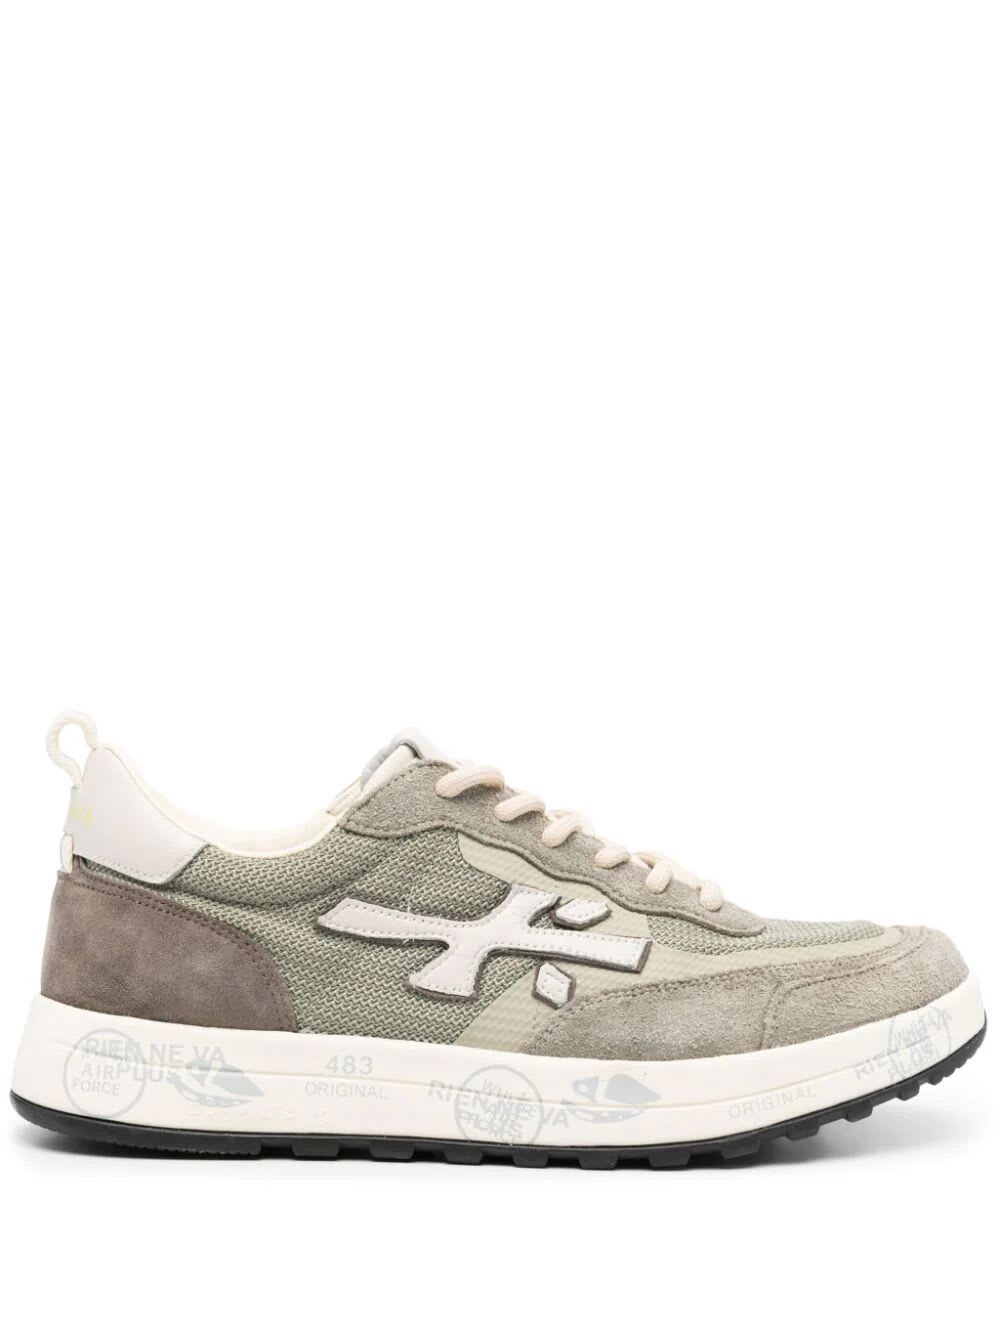 Premiata Nous City Logo Trainers In Military